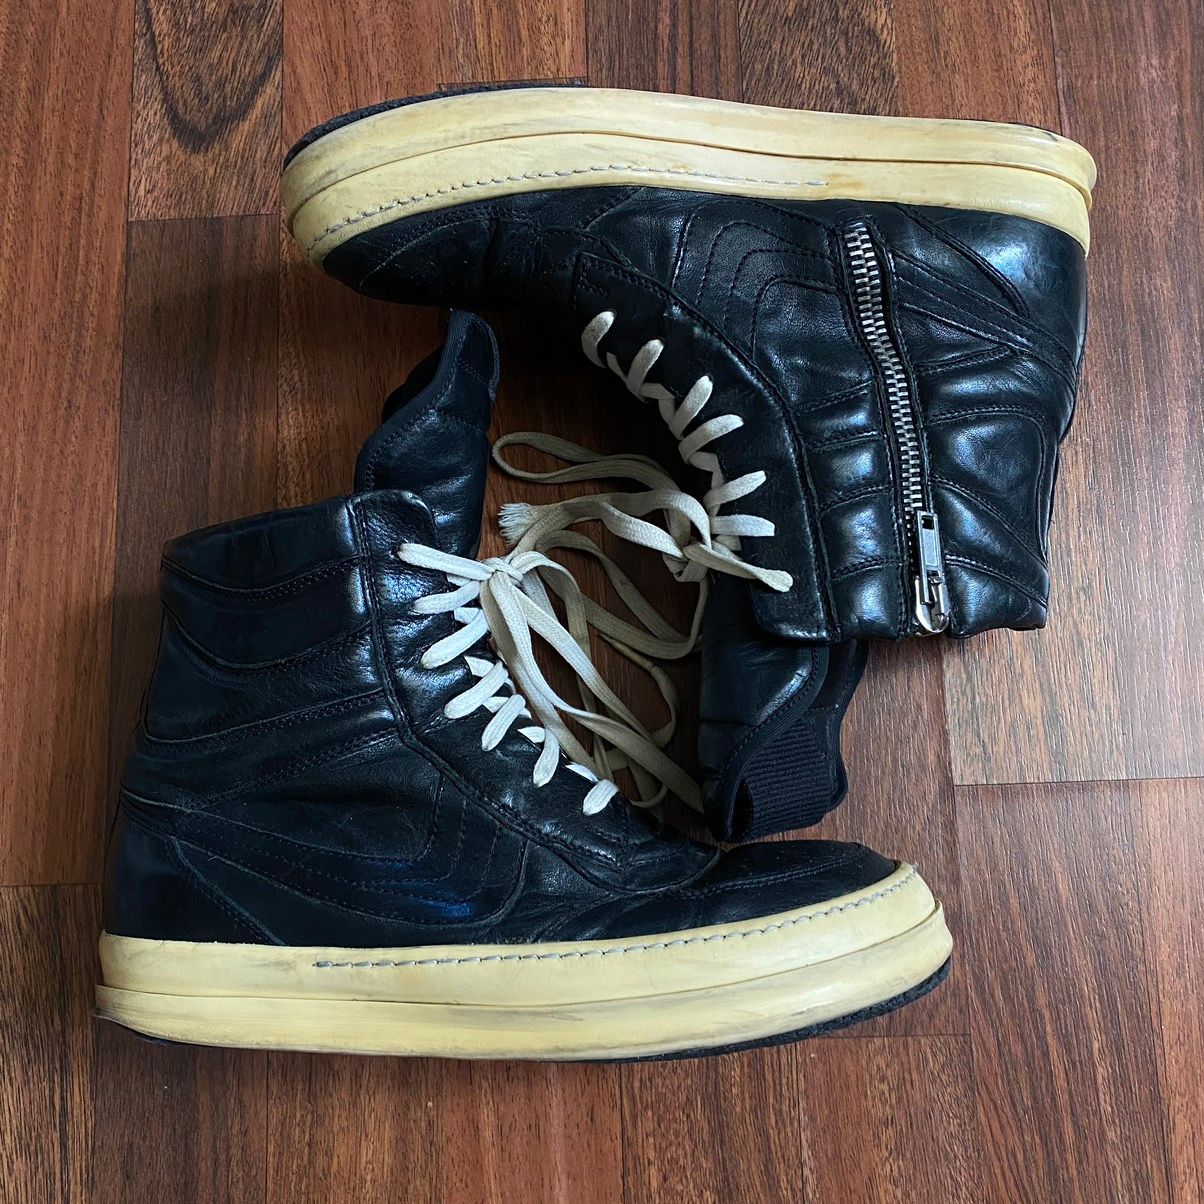 Pre-owned Rick Owens Black "dunks" - Ss10 "release" Shoes